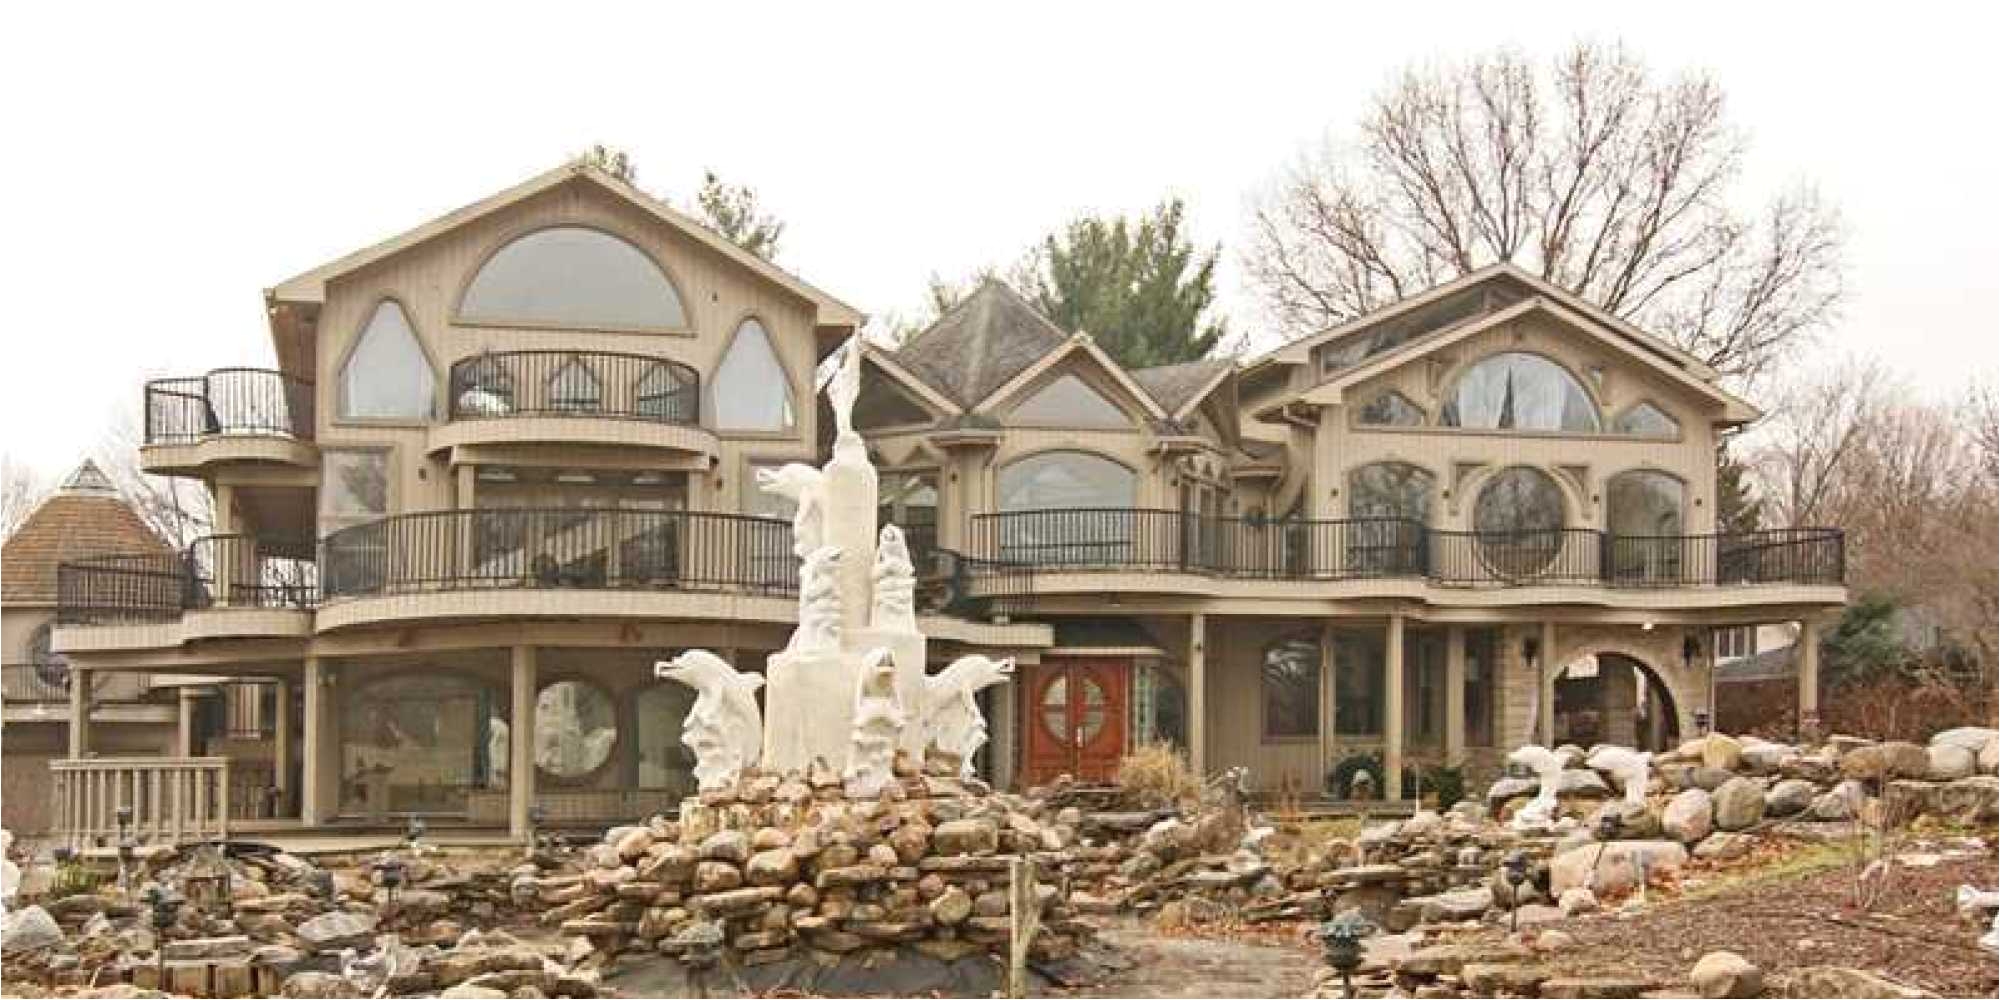 outlandish estate built by pimp is like nothing youve ever seen photos huffpost